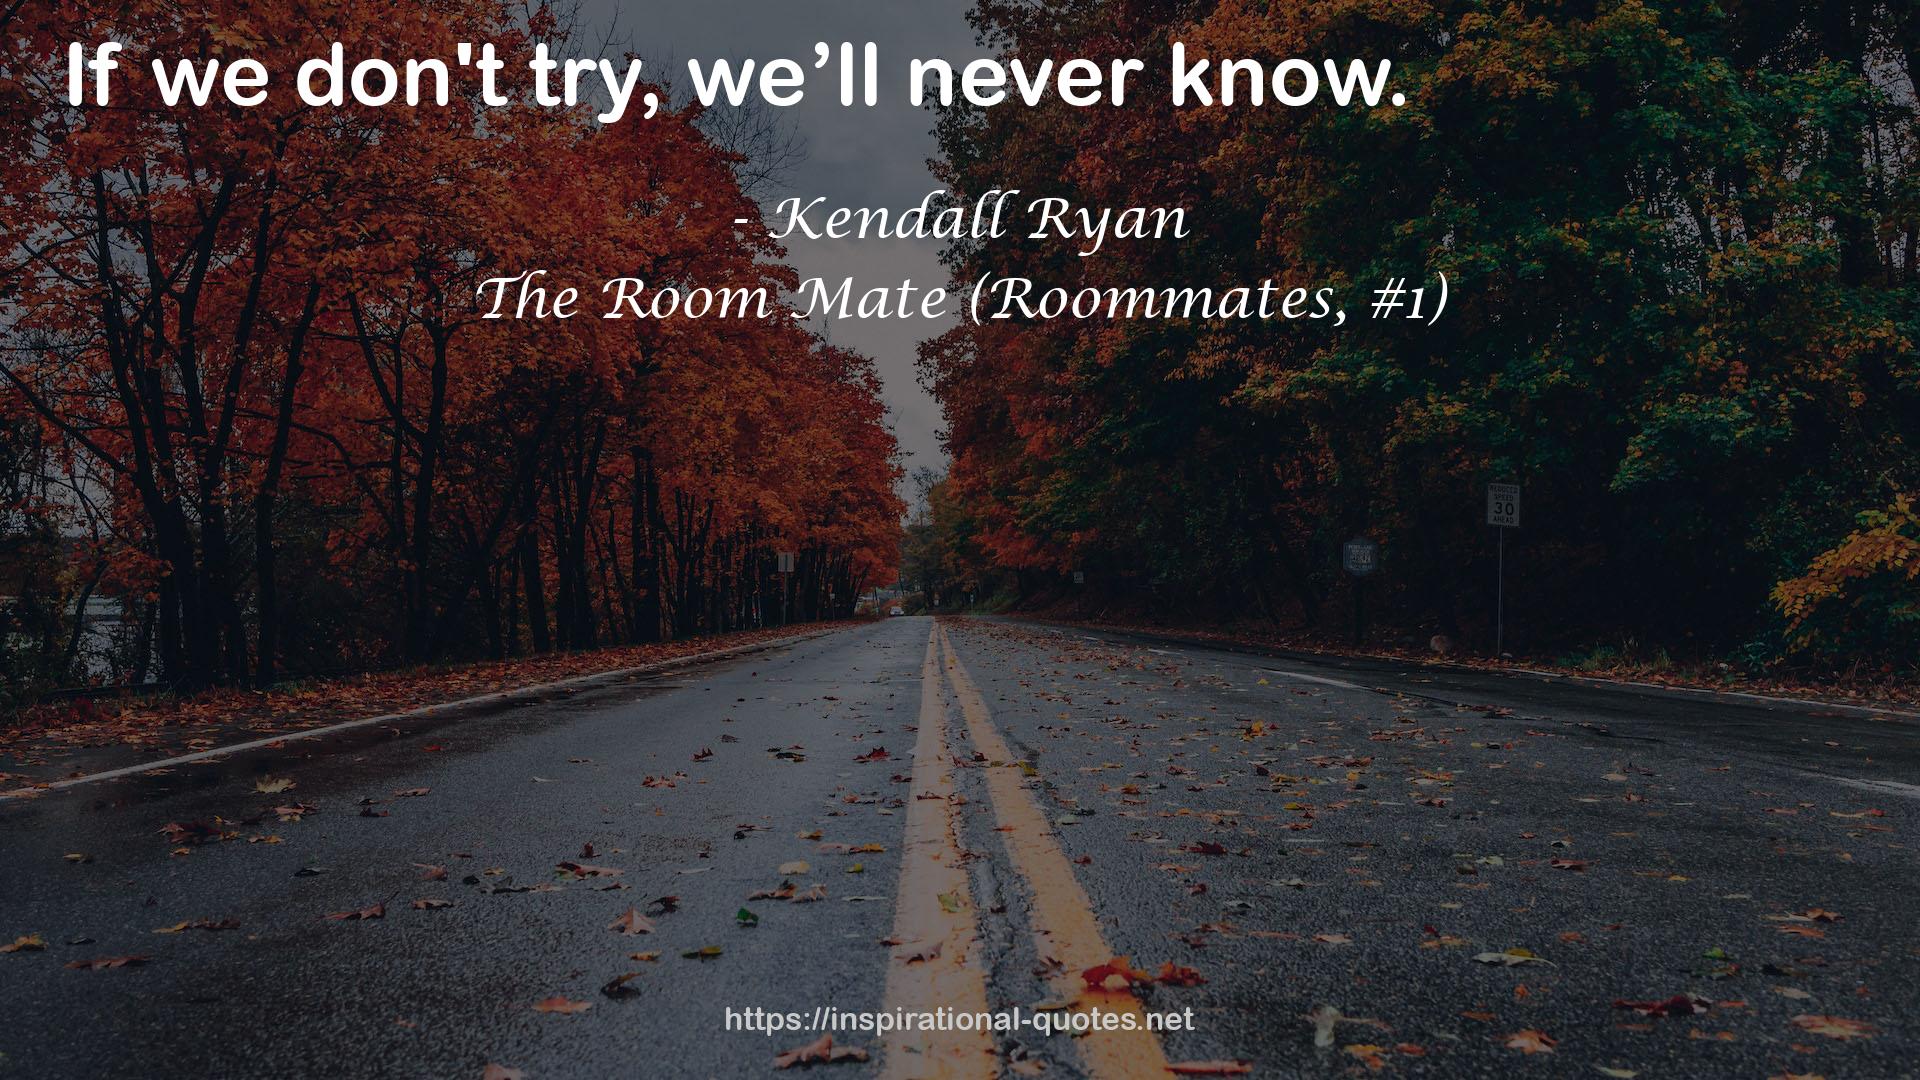 The Room Mate (Roommates, #1) QUOTES